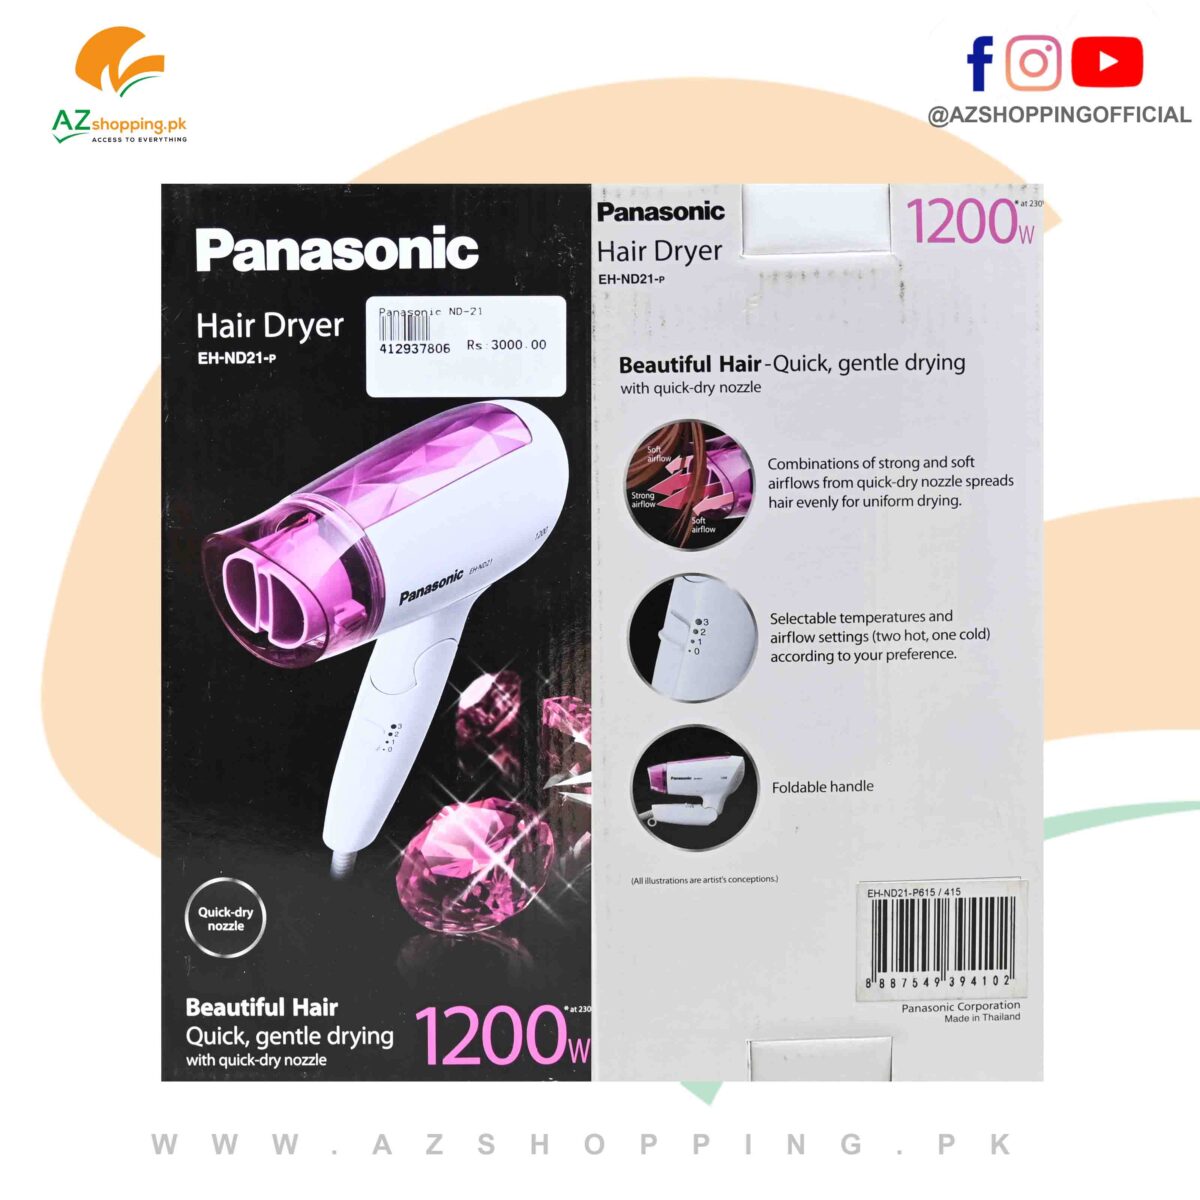 Panasonic – Foldable Hair Dryer with Quick-dry Nozzle & Three-Speed Setting (Fast Dry, Hot, Cold Wind Speed) 1200W – Model: EH-ND21-P